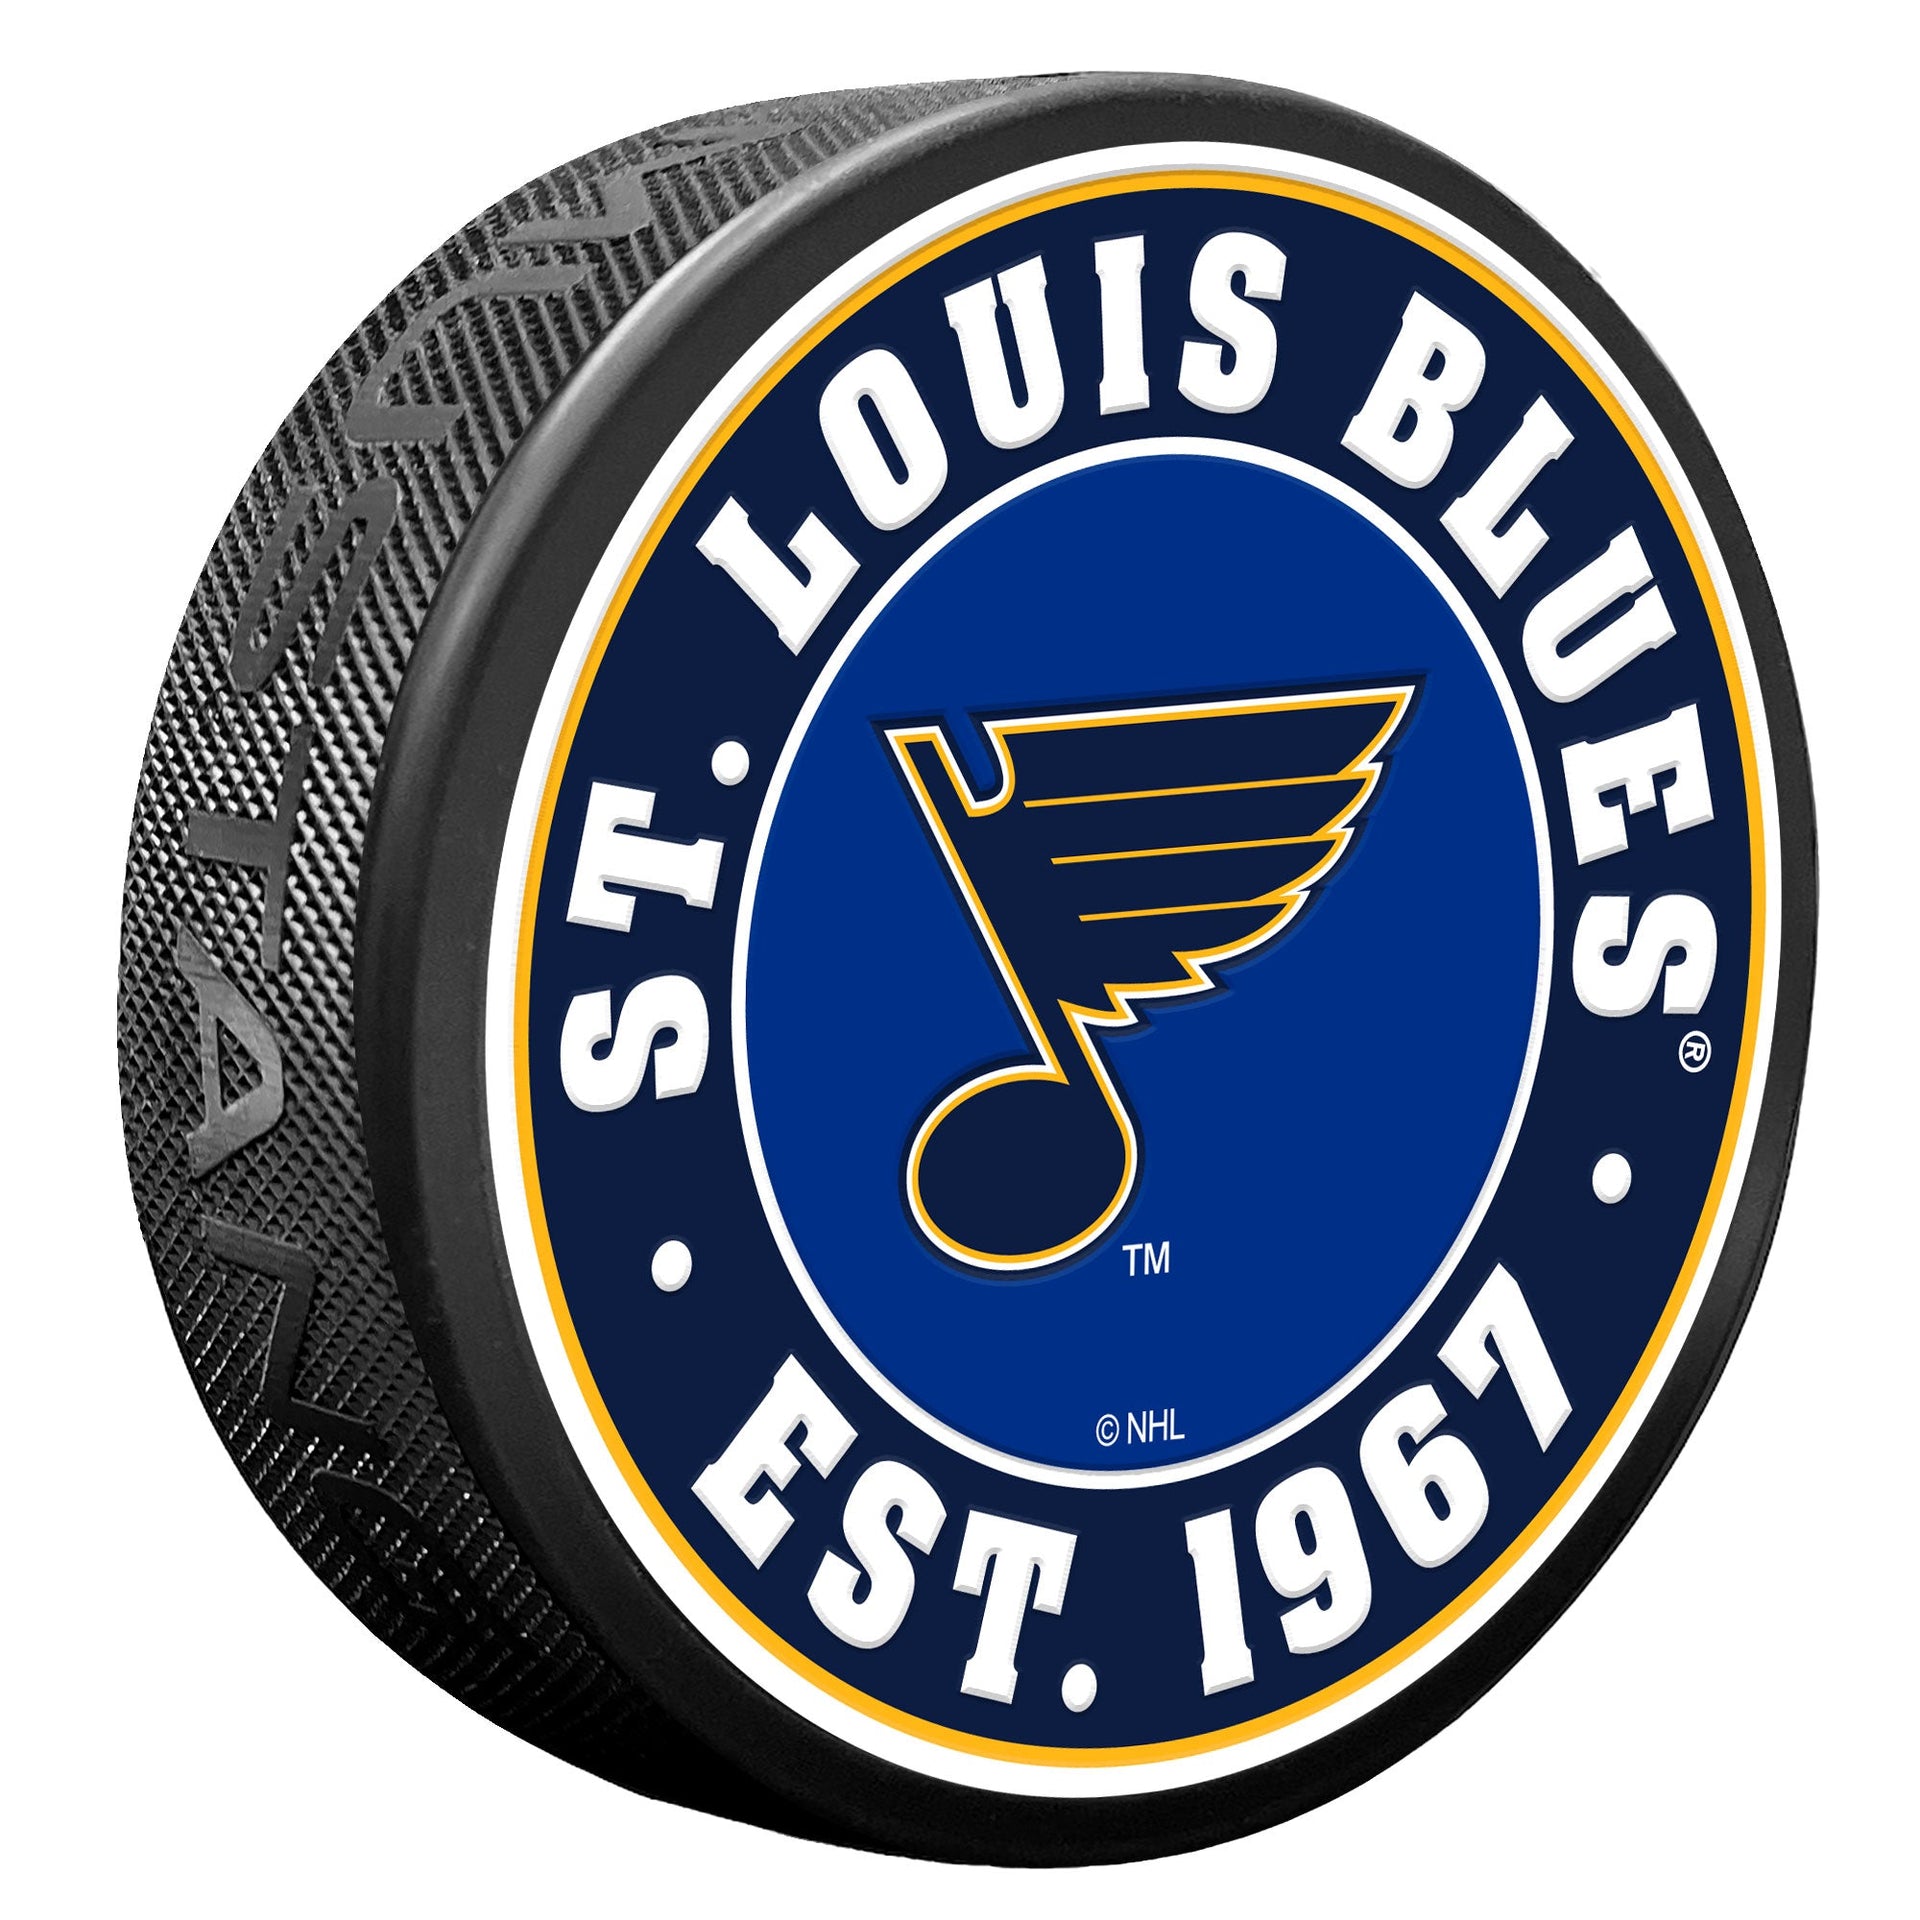 St Louis Blues #1 Dad Textured Puck – Hockey Hall of Fame